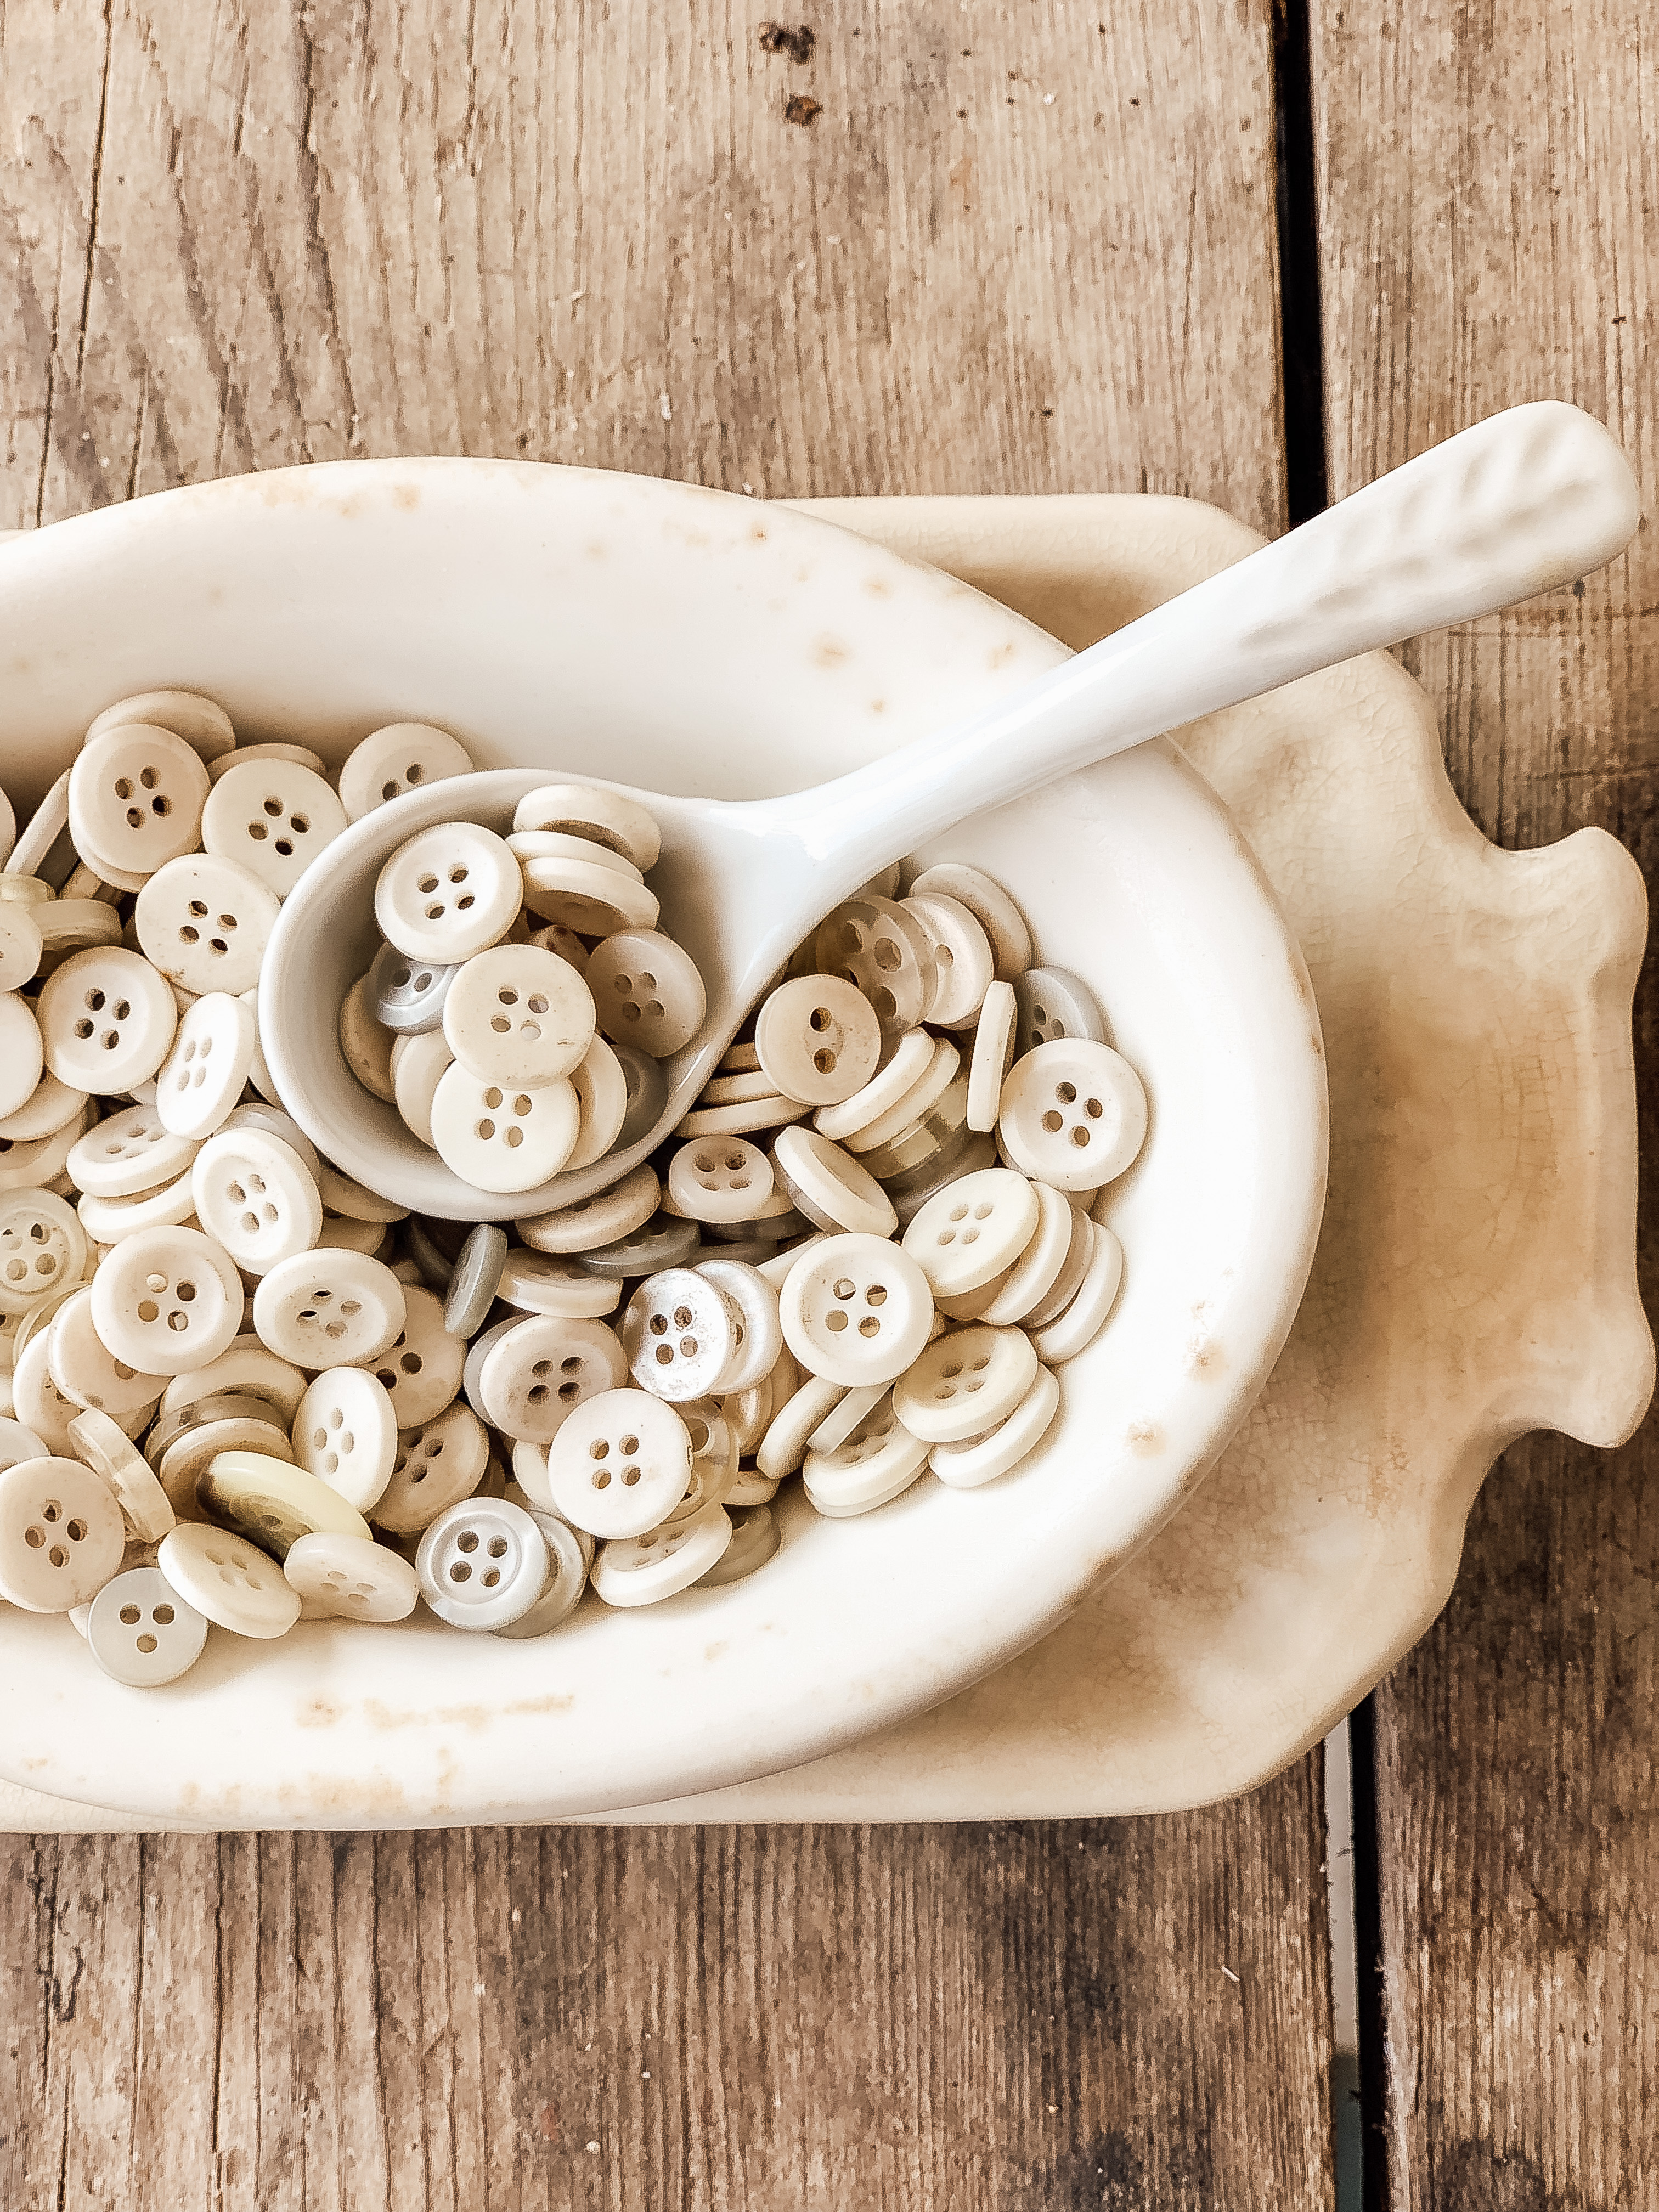 old buttons in a bowl